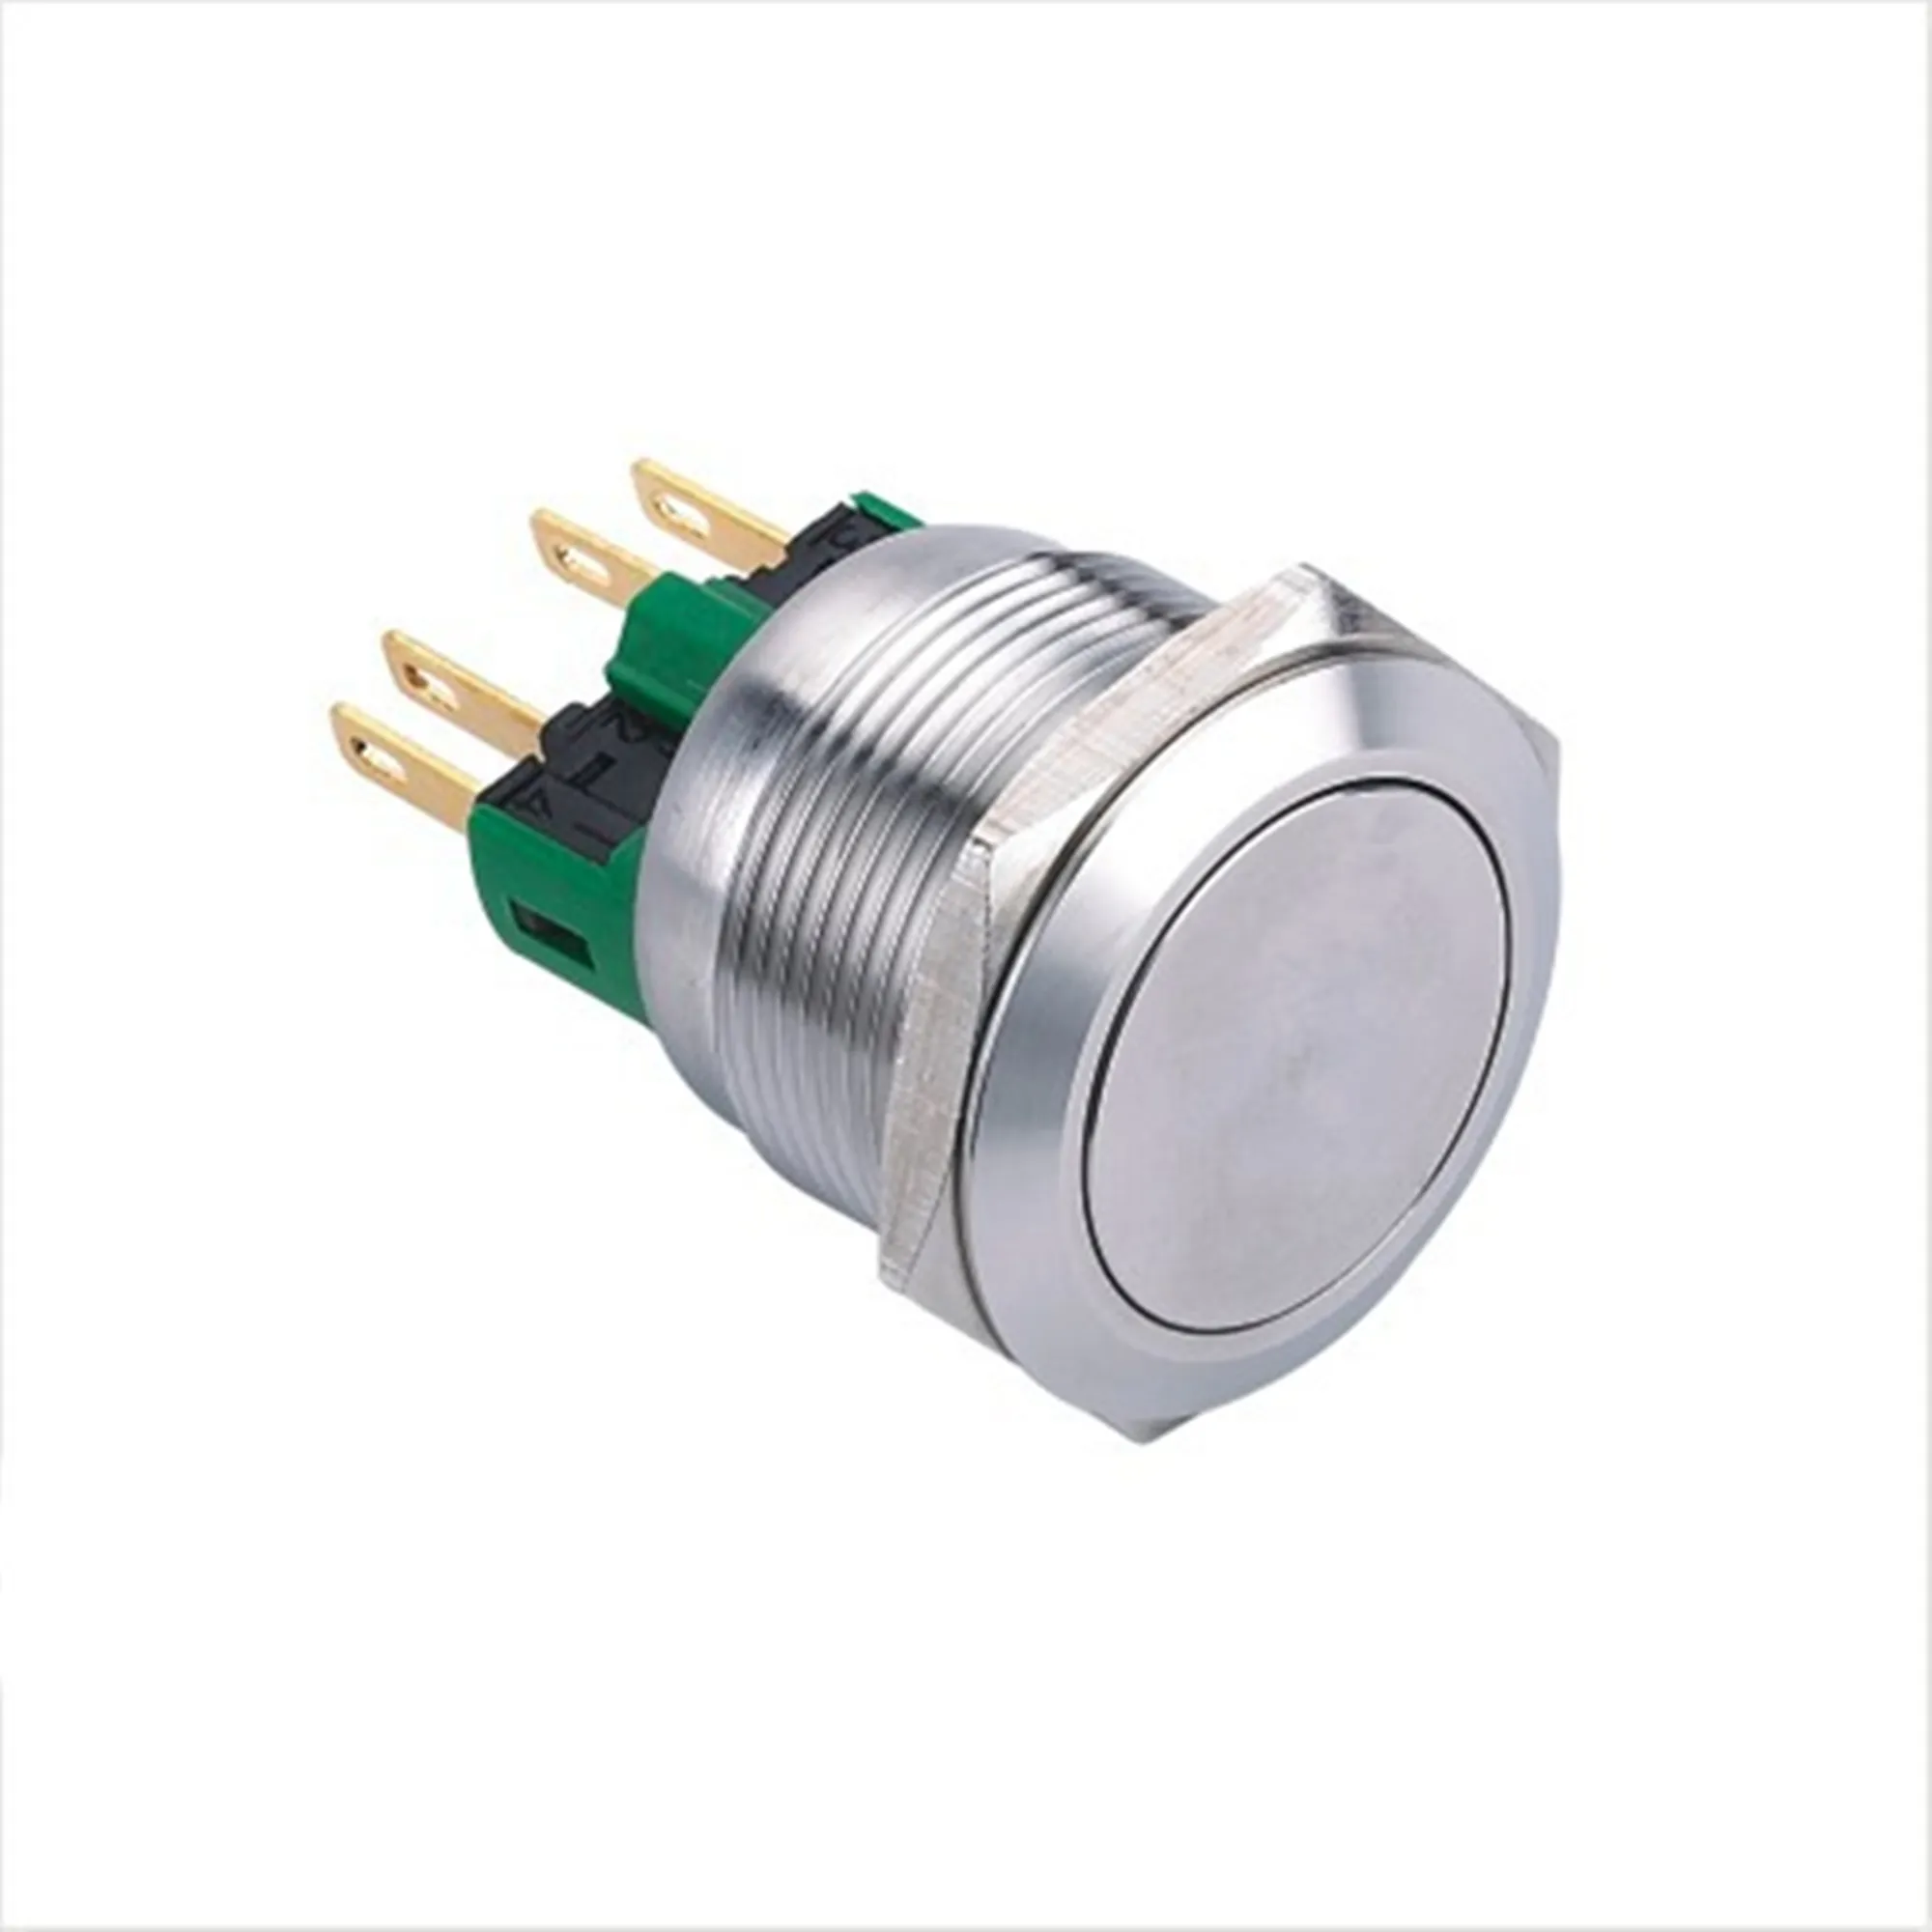 elewind 25mm push momentary buttons 1NO1NC Stainless steel push switch button(PM251F-11/S)